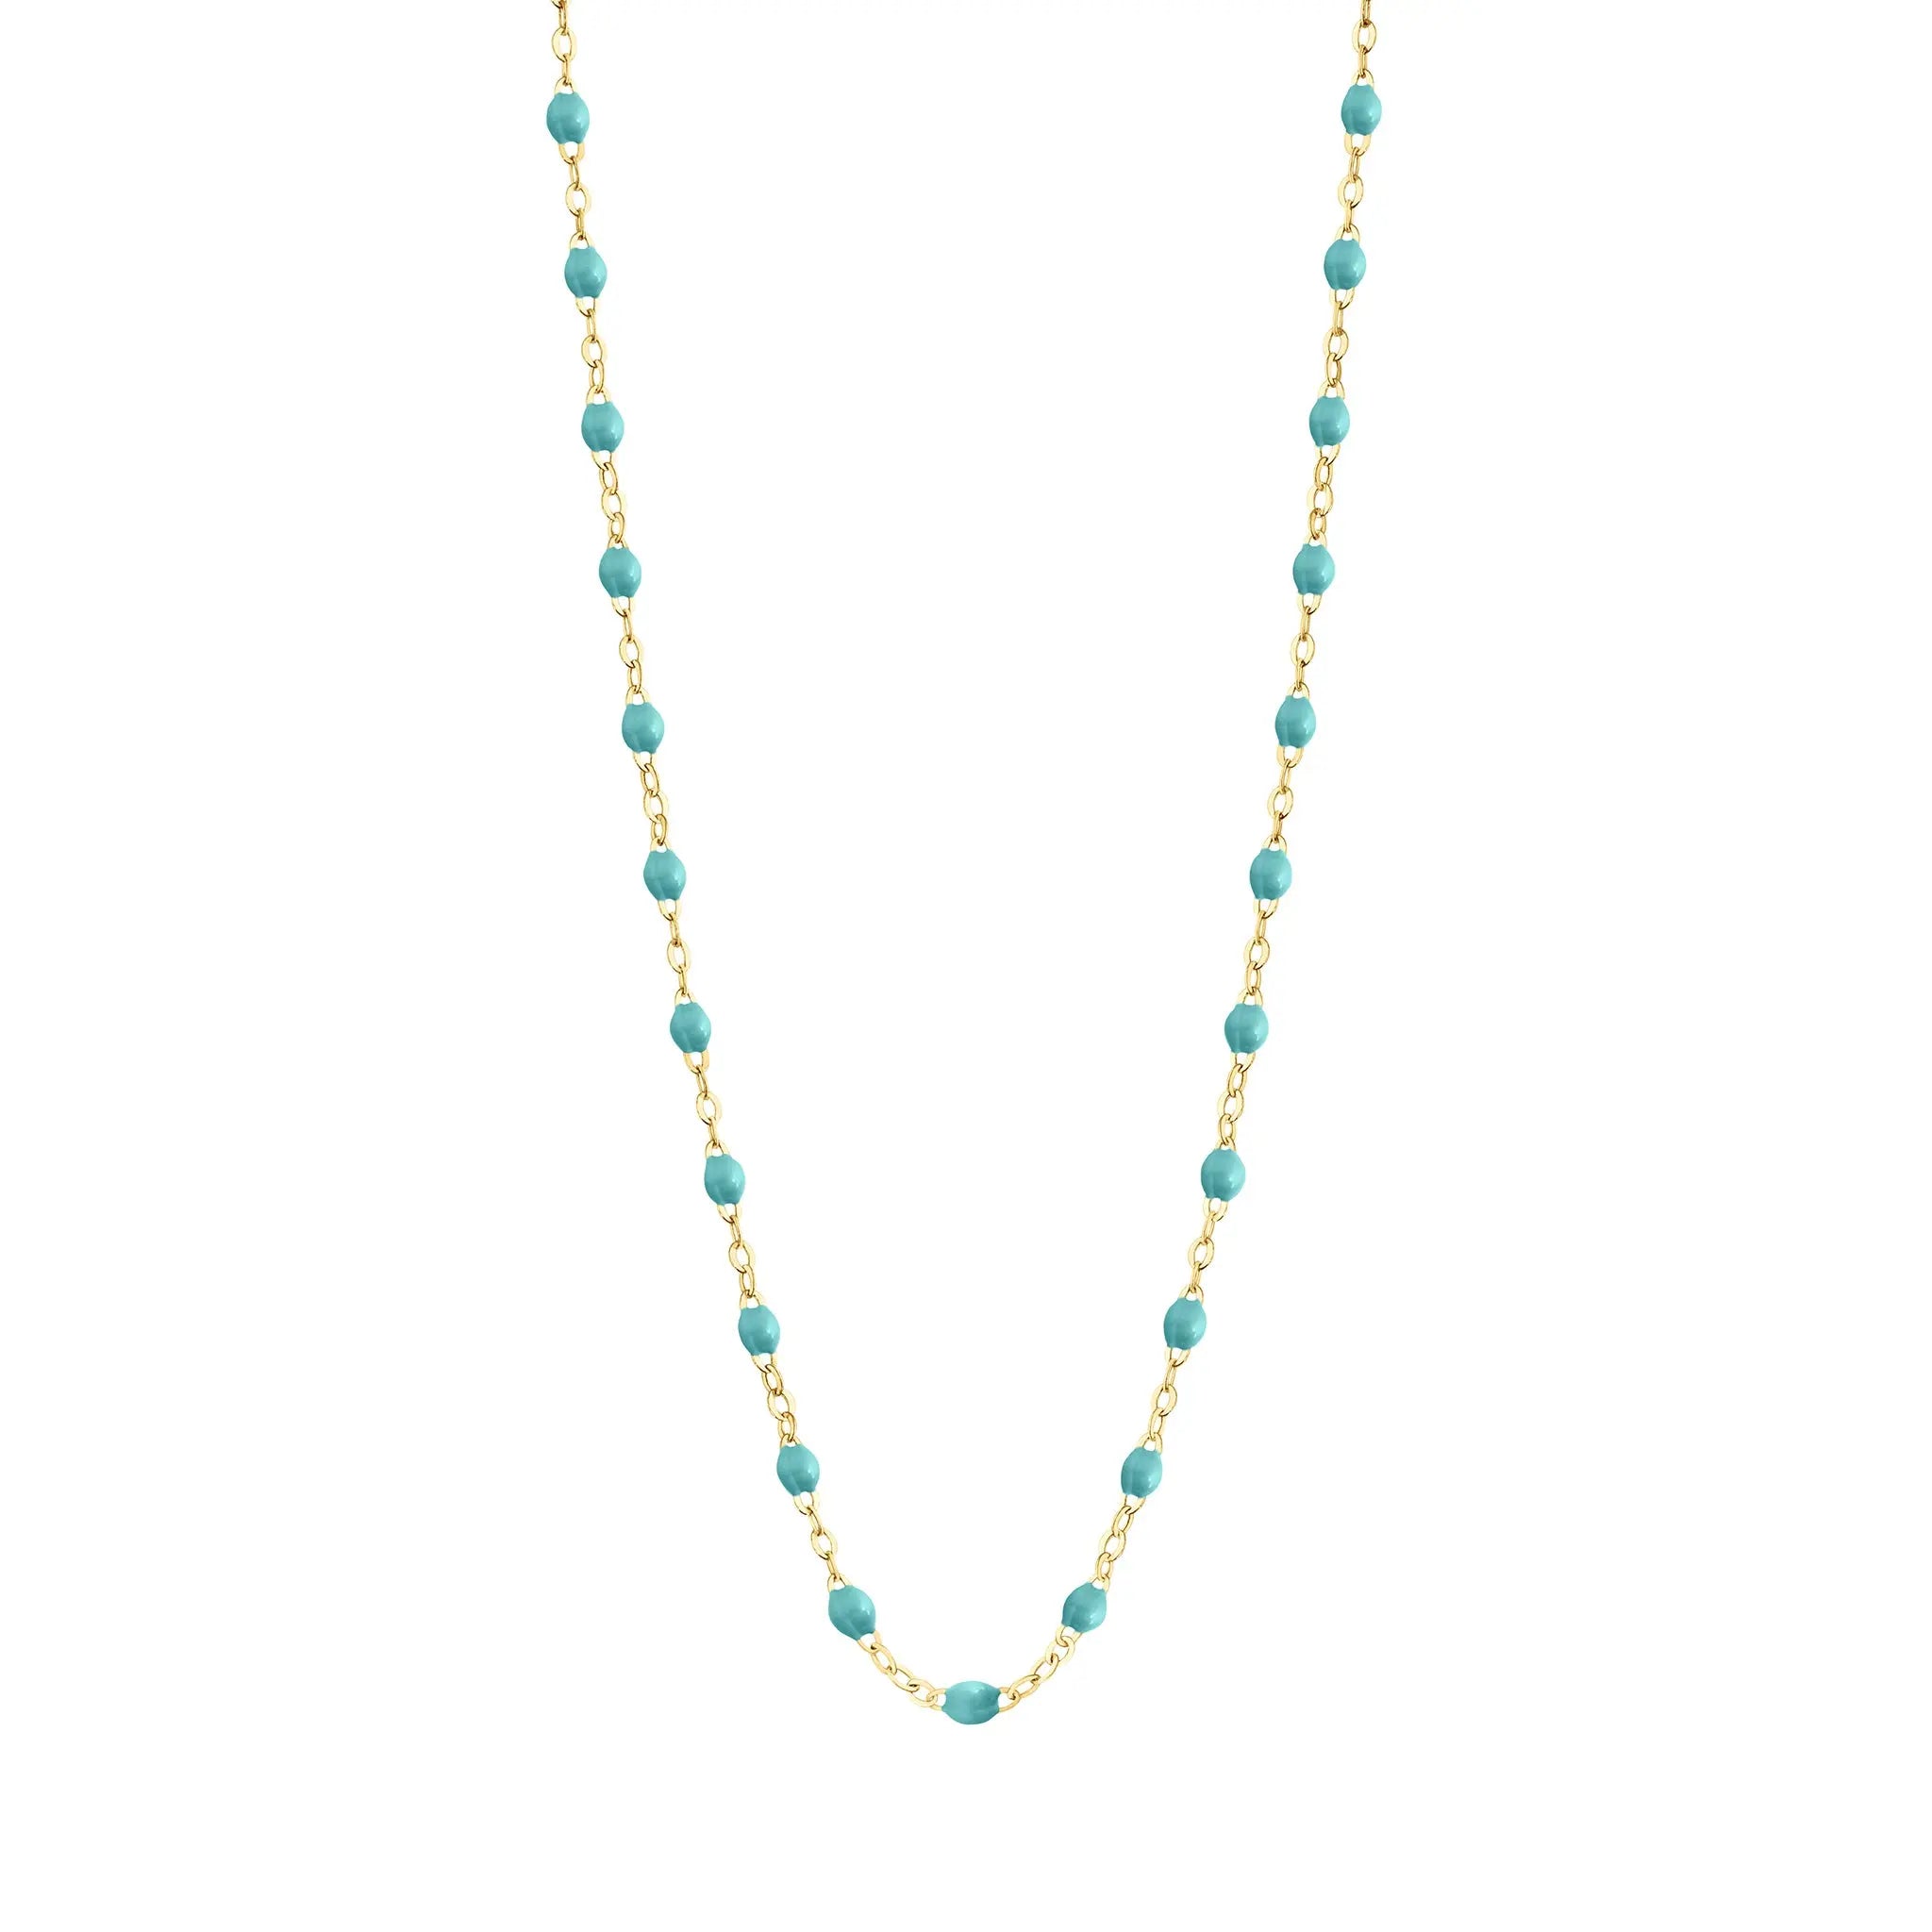 Stack you necklace layers with this versatile beaded chain! The Classic Gigi Necklace by gigi CLOZEAU features 18 carat yellow gold, and striking Turquoise Green resin jewels for an everyday effortless appearance. Handcrafted in 18k yellow gold. The beads measure 1.50mm in diameter and is finished with a spring ring clasp. The length is 19.7 inches.